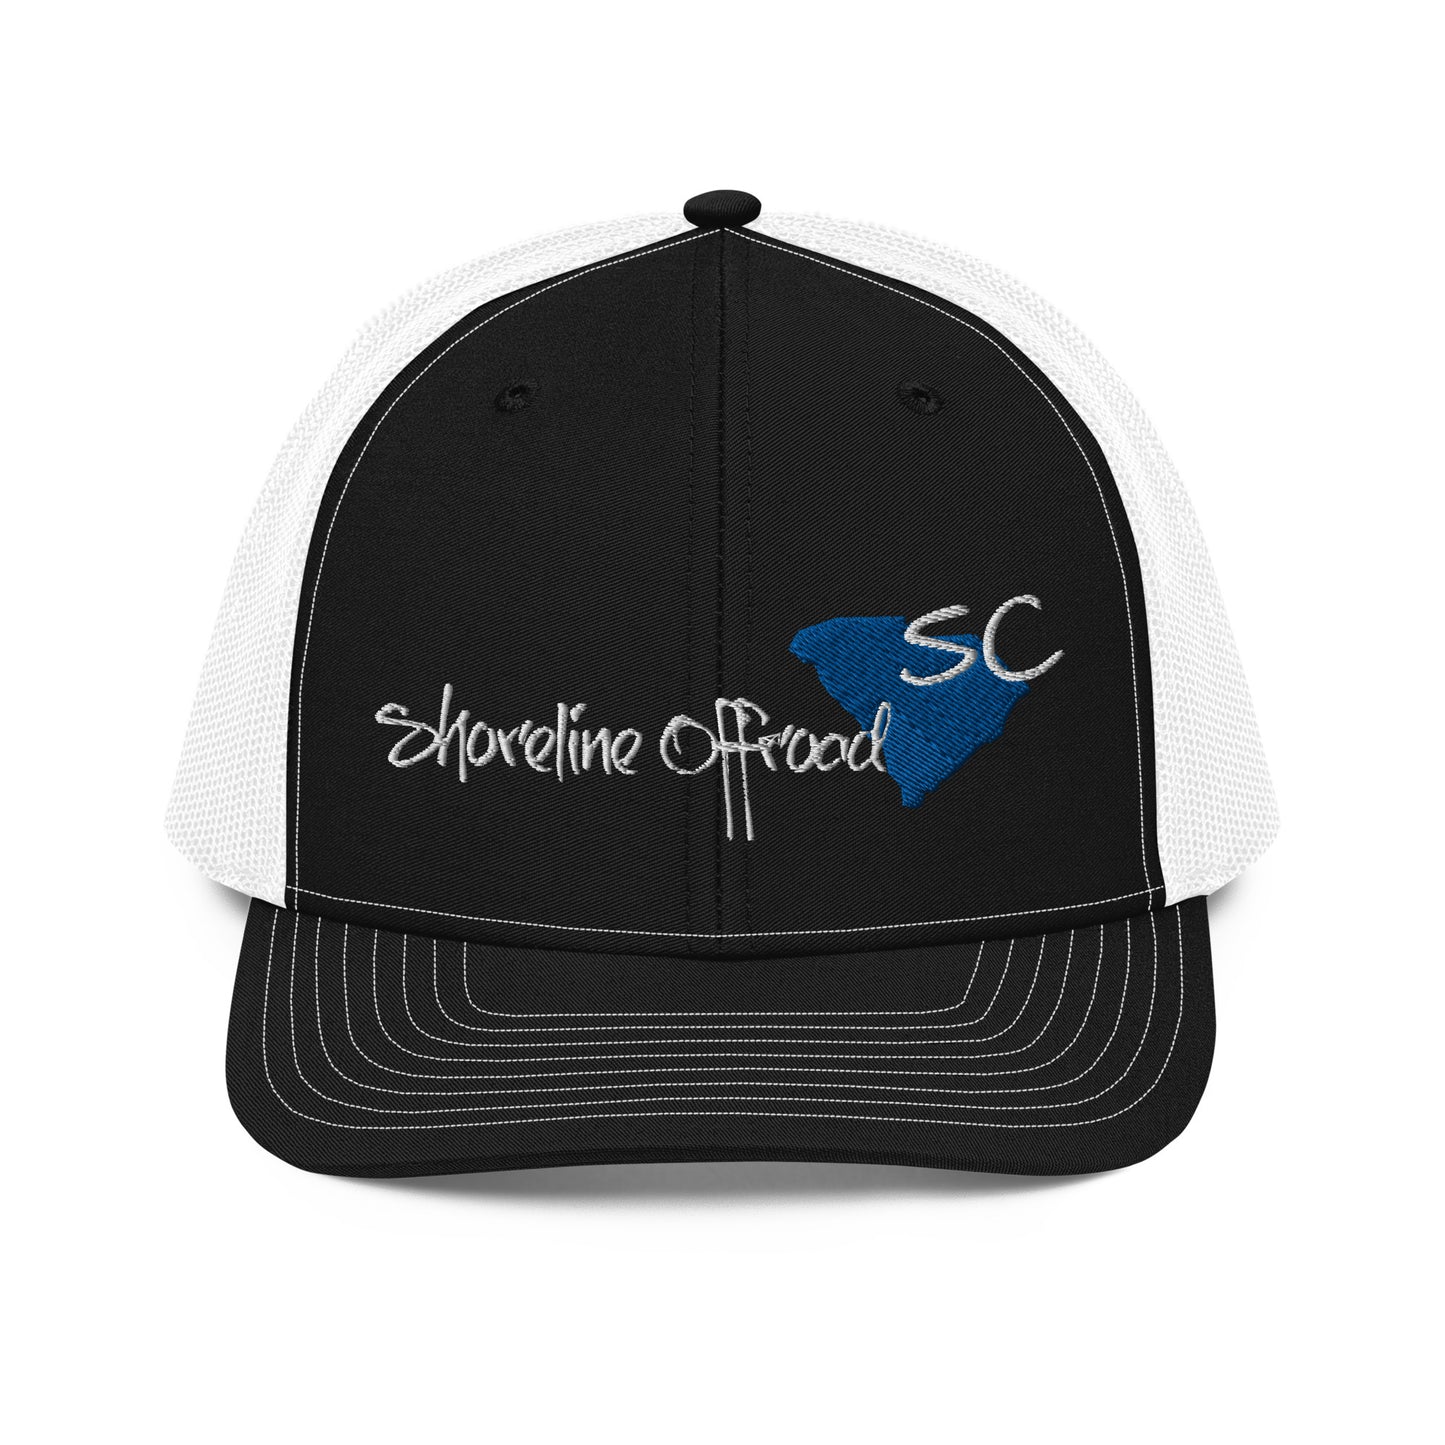 a black and white trucker hat with a blue and white logo